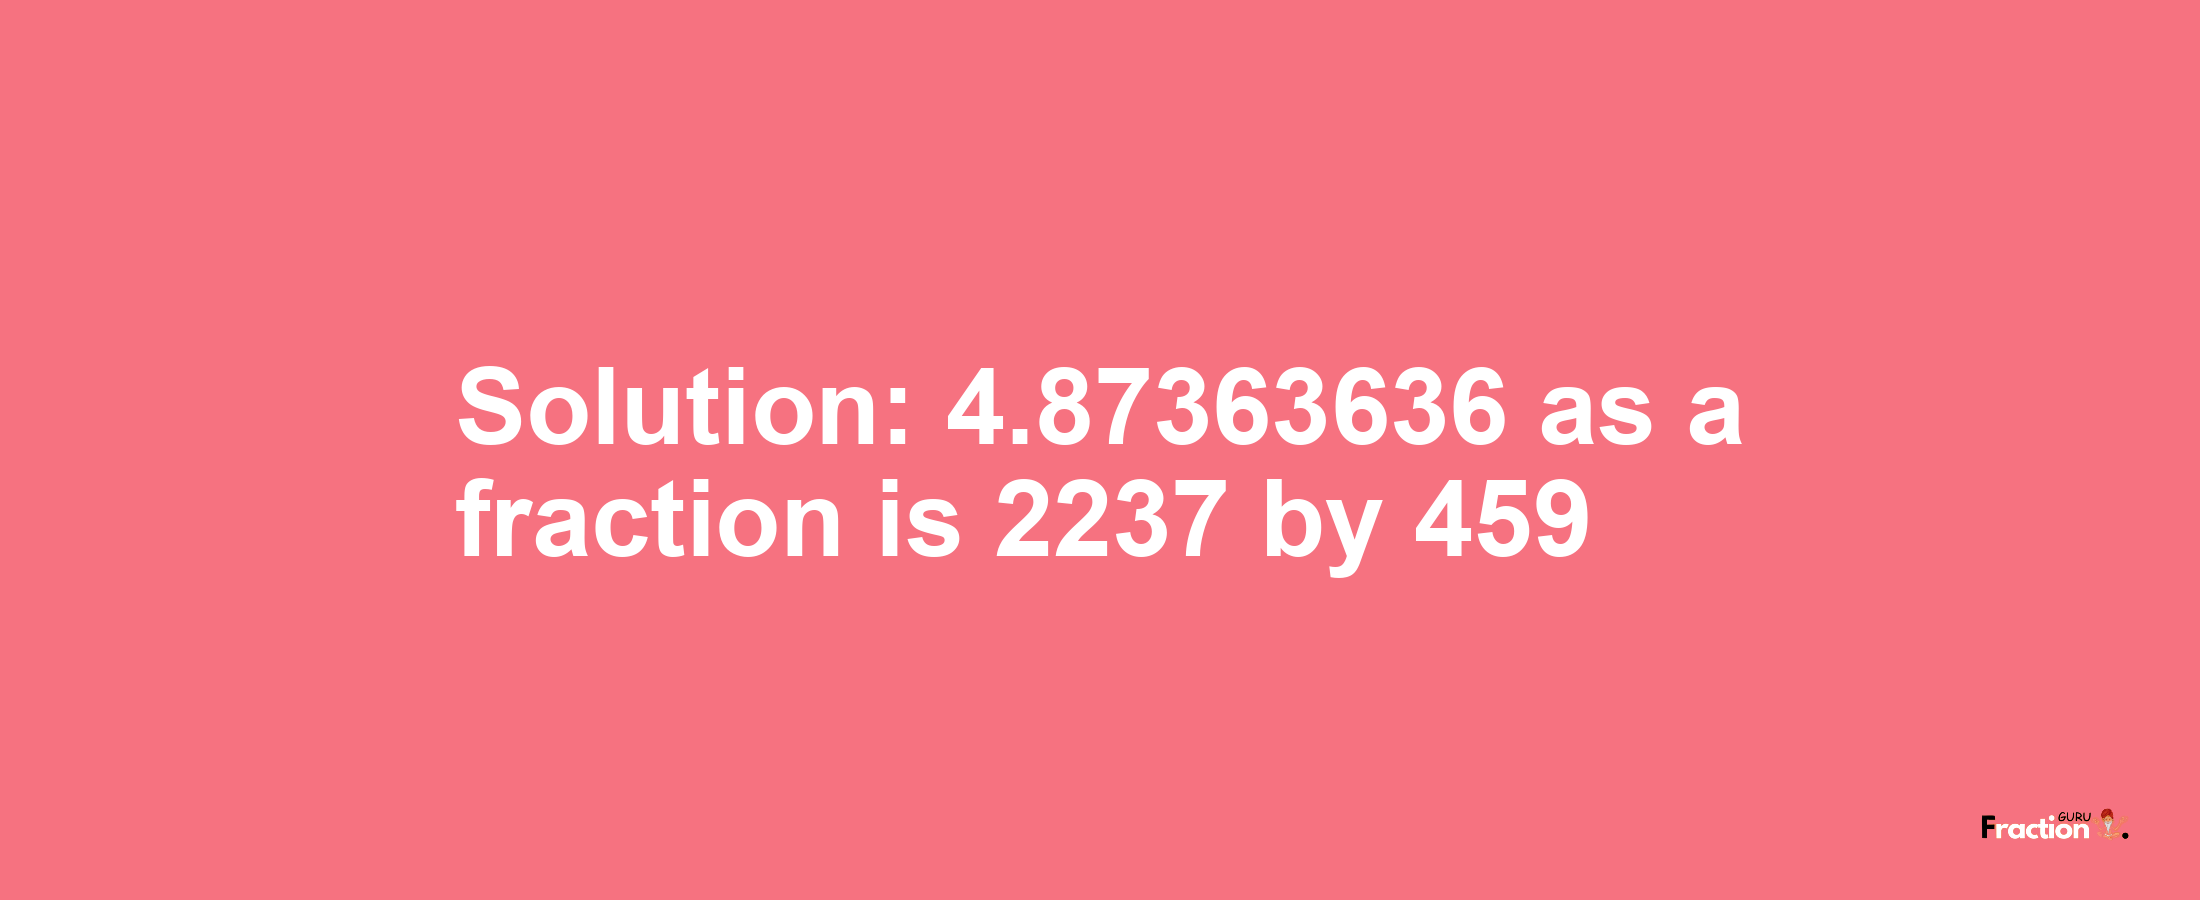 Solution:4.87363636 as a fraction is 2237/459